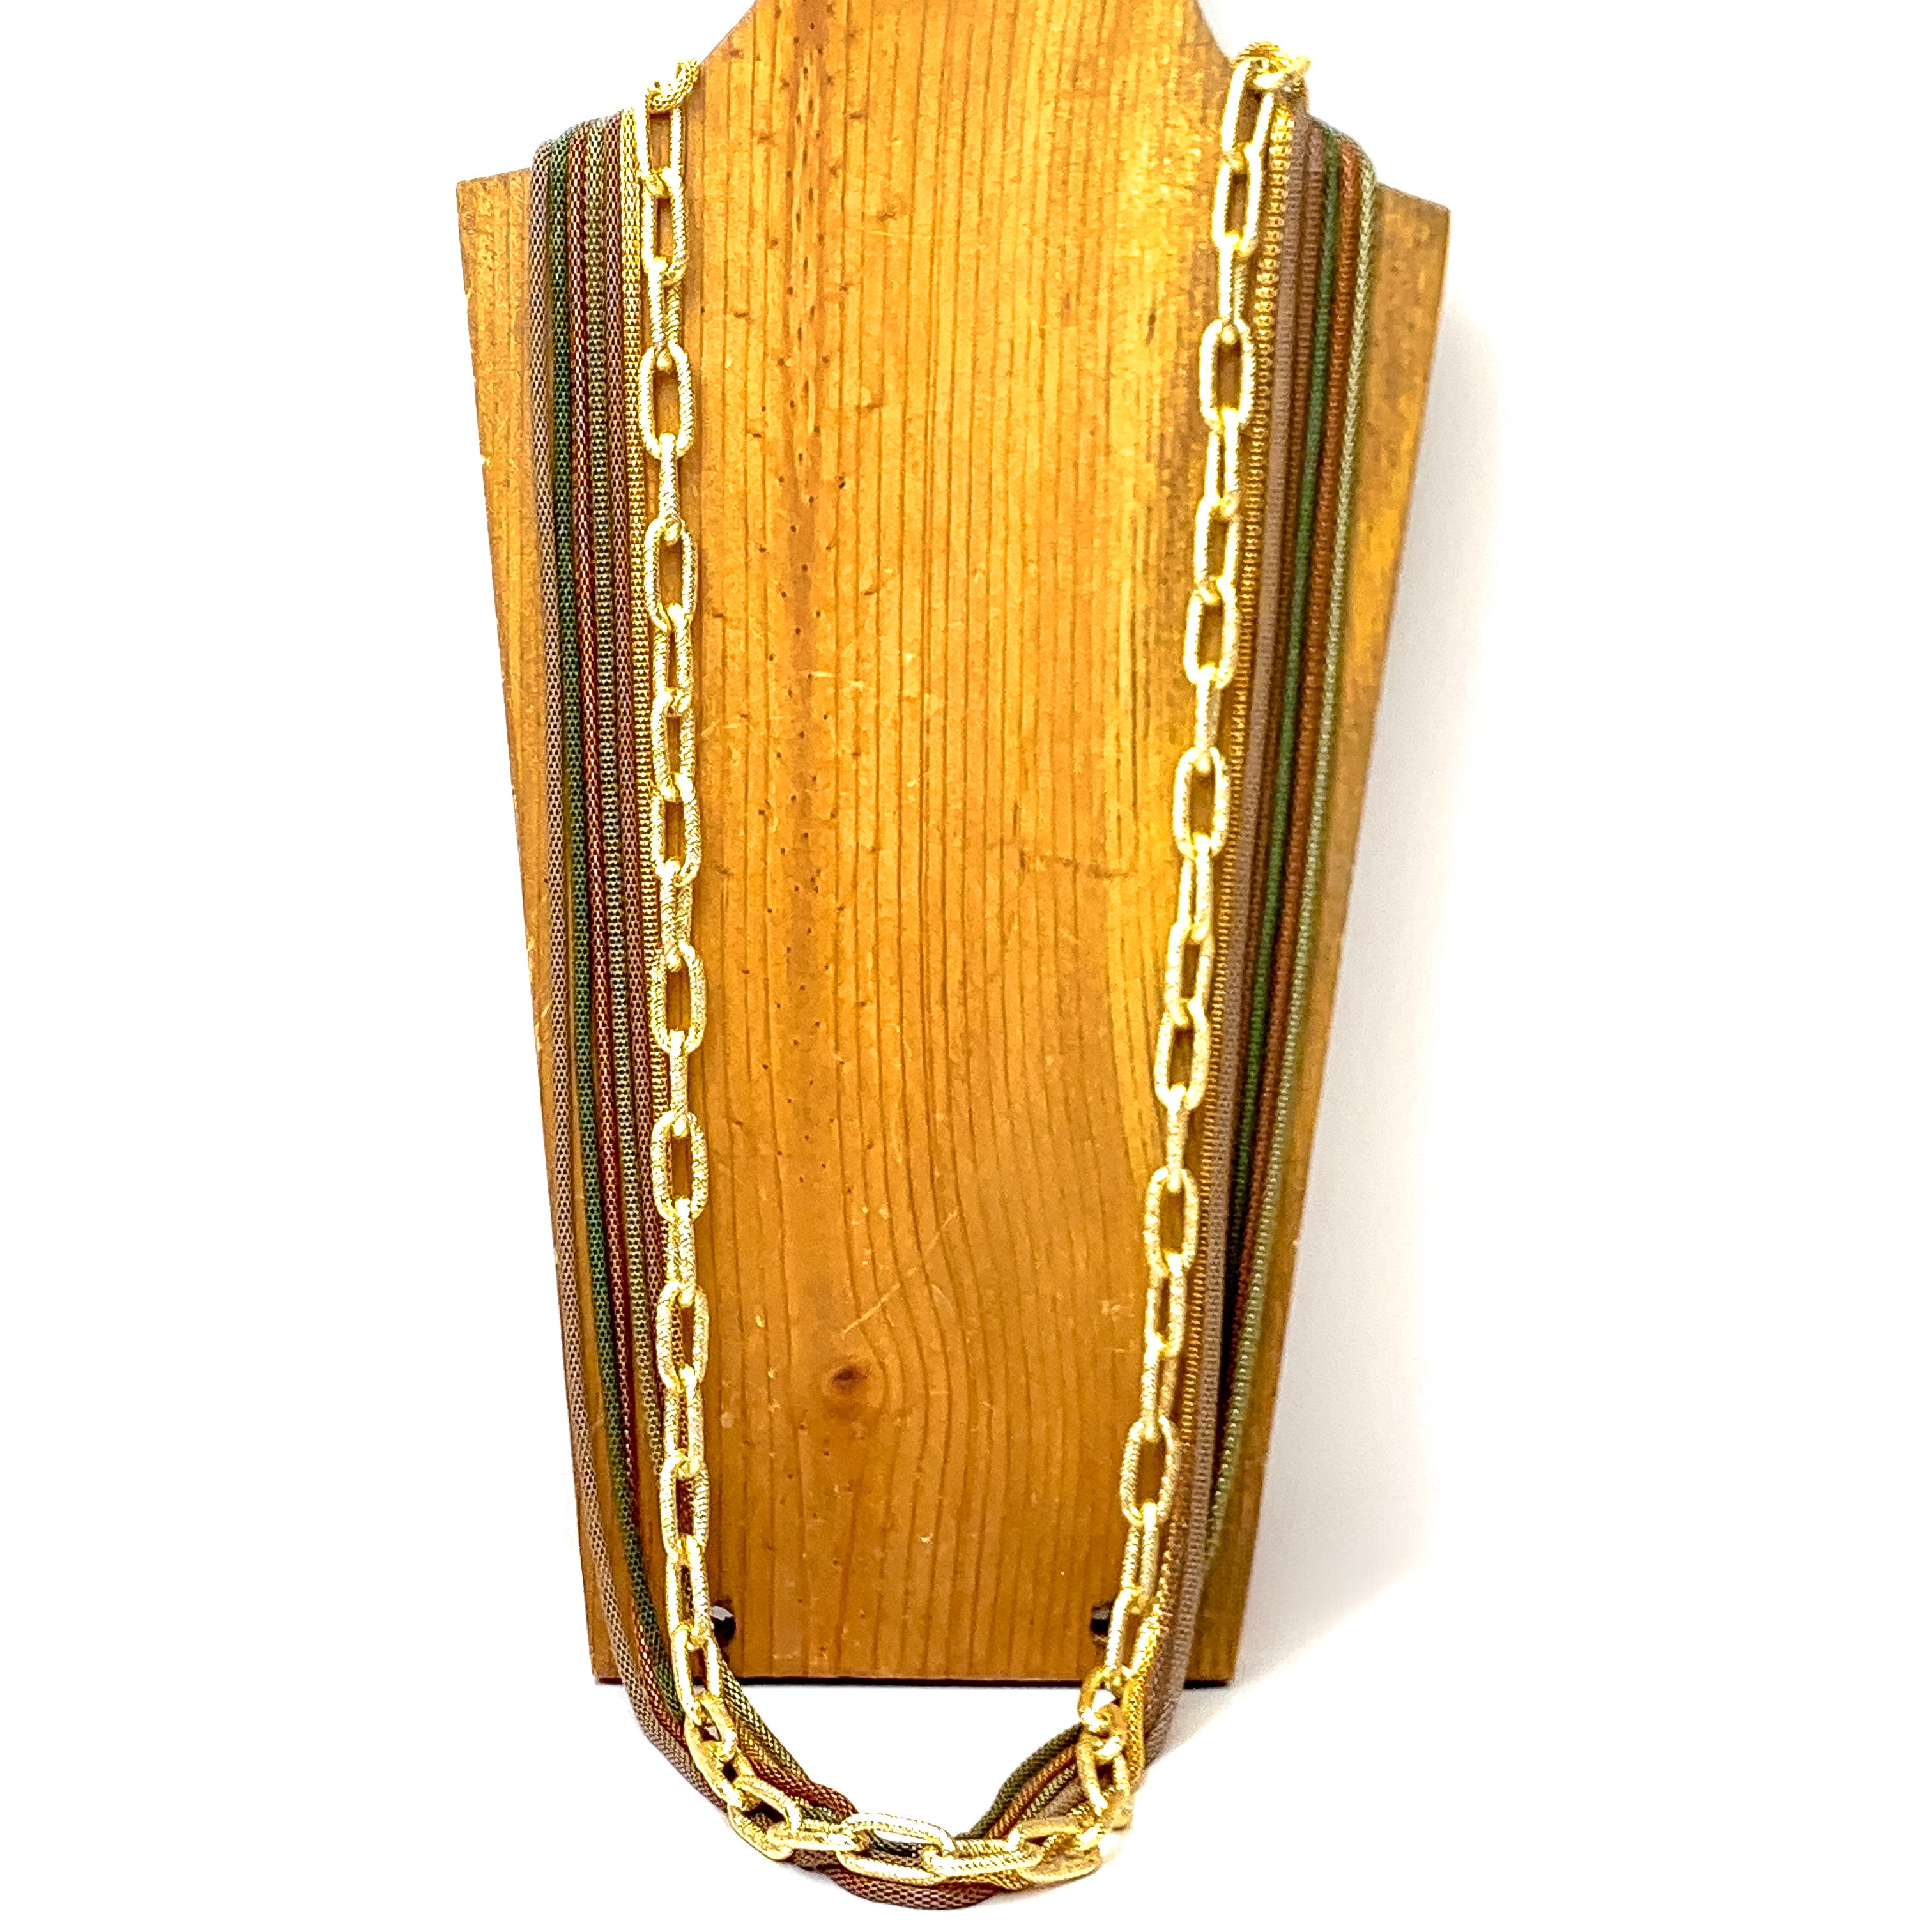 Urban Links Gold Tone Multistrand Mesh Chain Necklace - Giddy Up Glamour Boutique